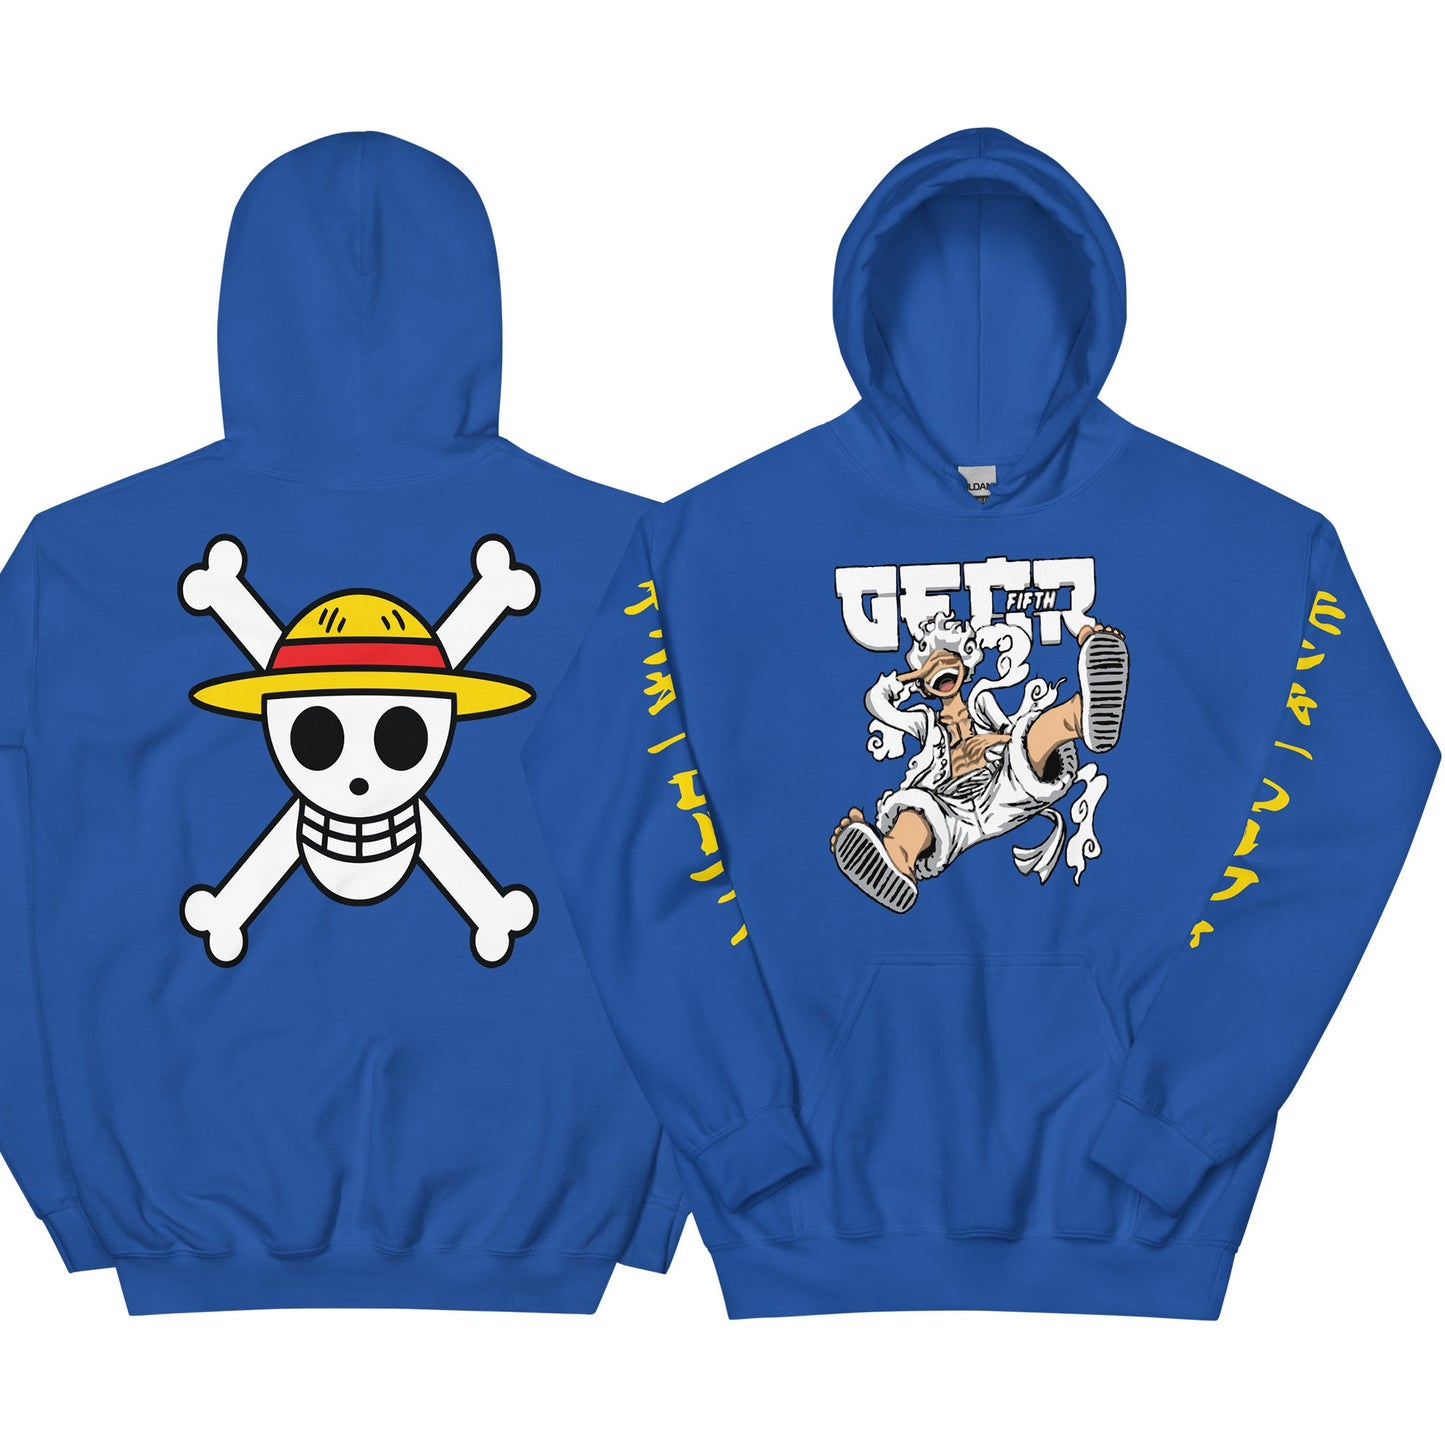 Inspiring Anime hoodie - Luffy Gear 5 - The Truth Graphics